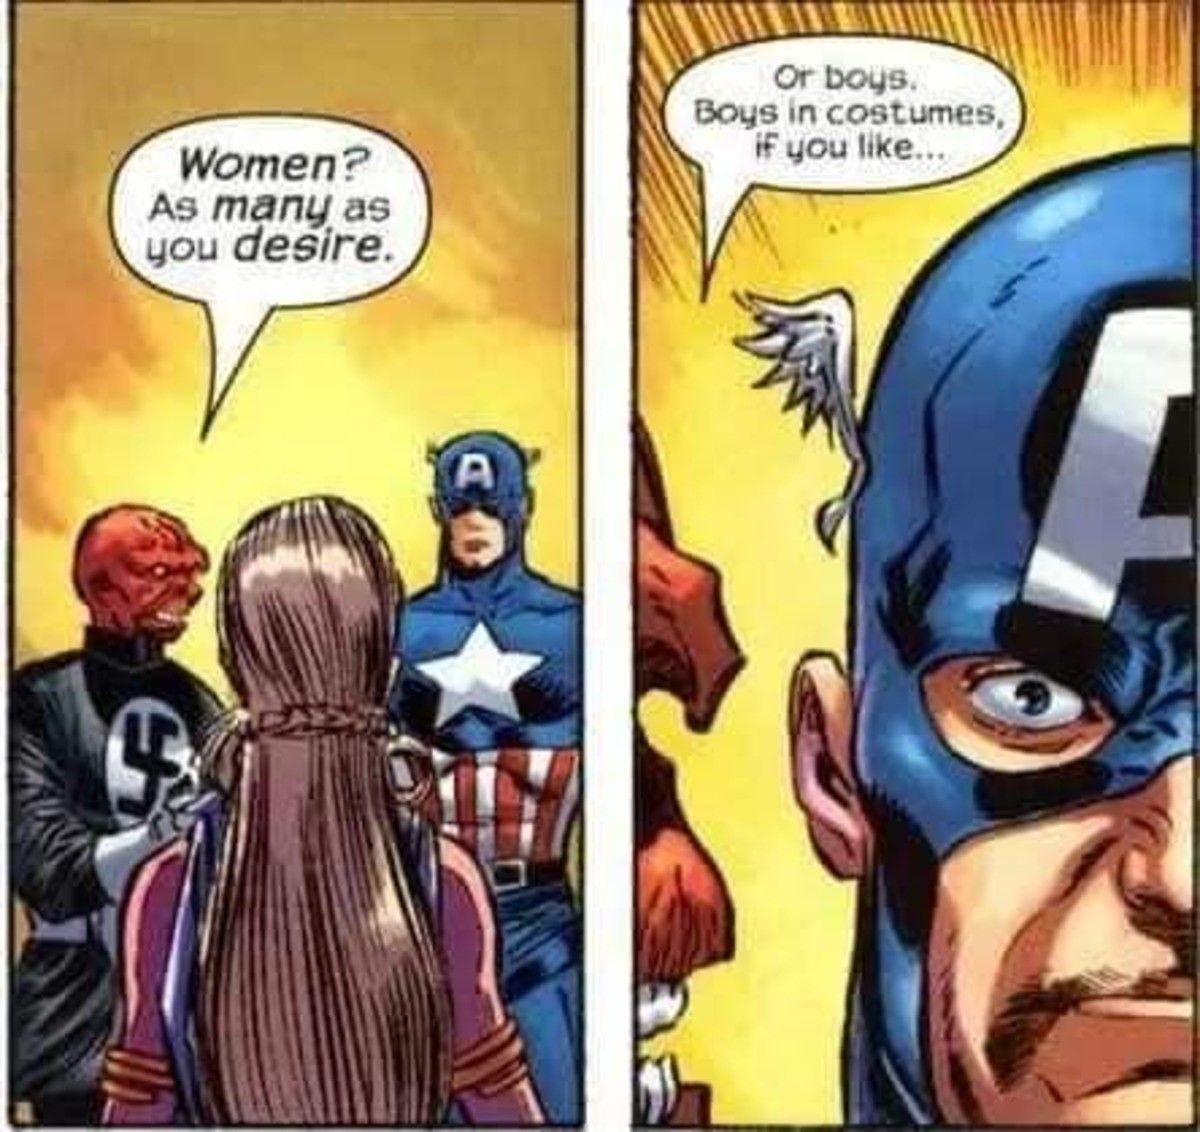 what is Cap's face conveying?